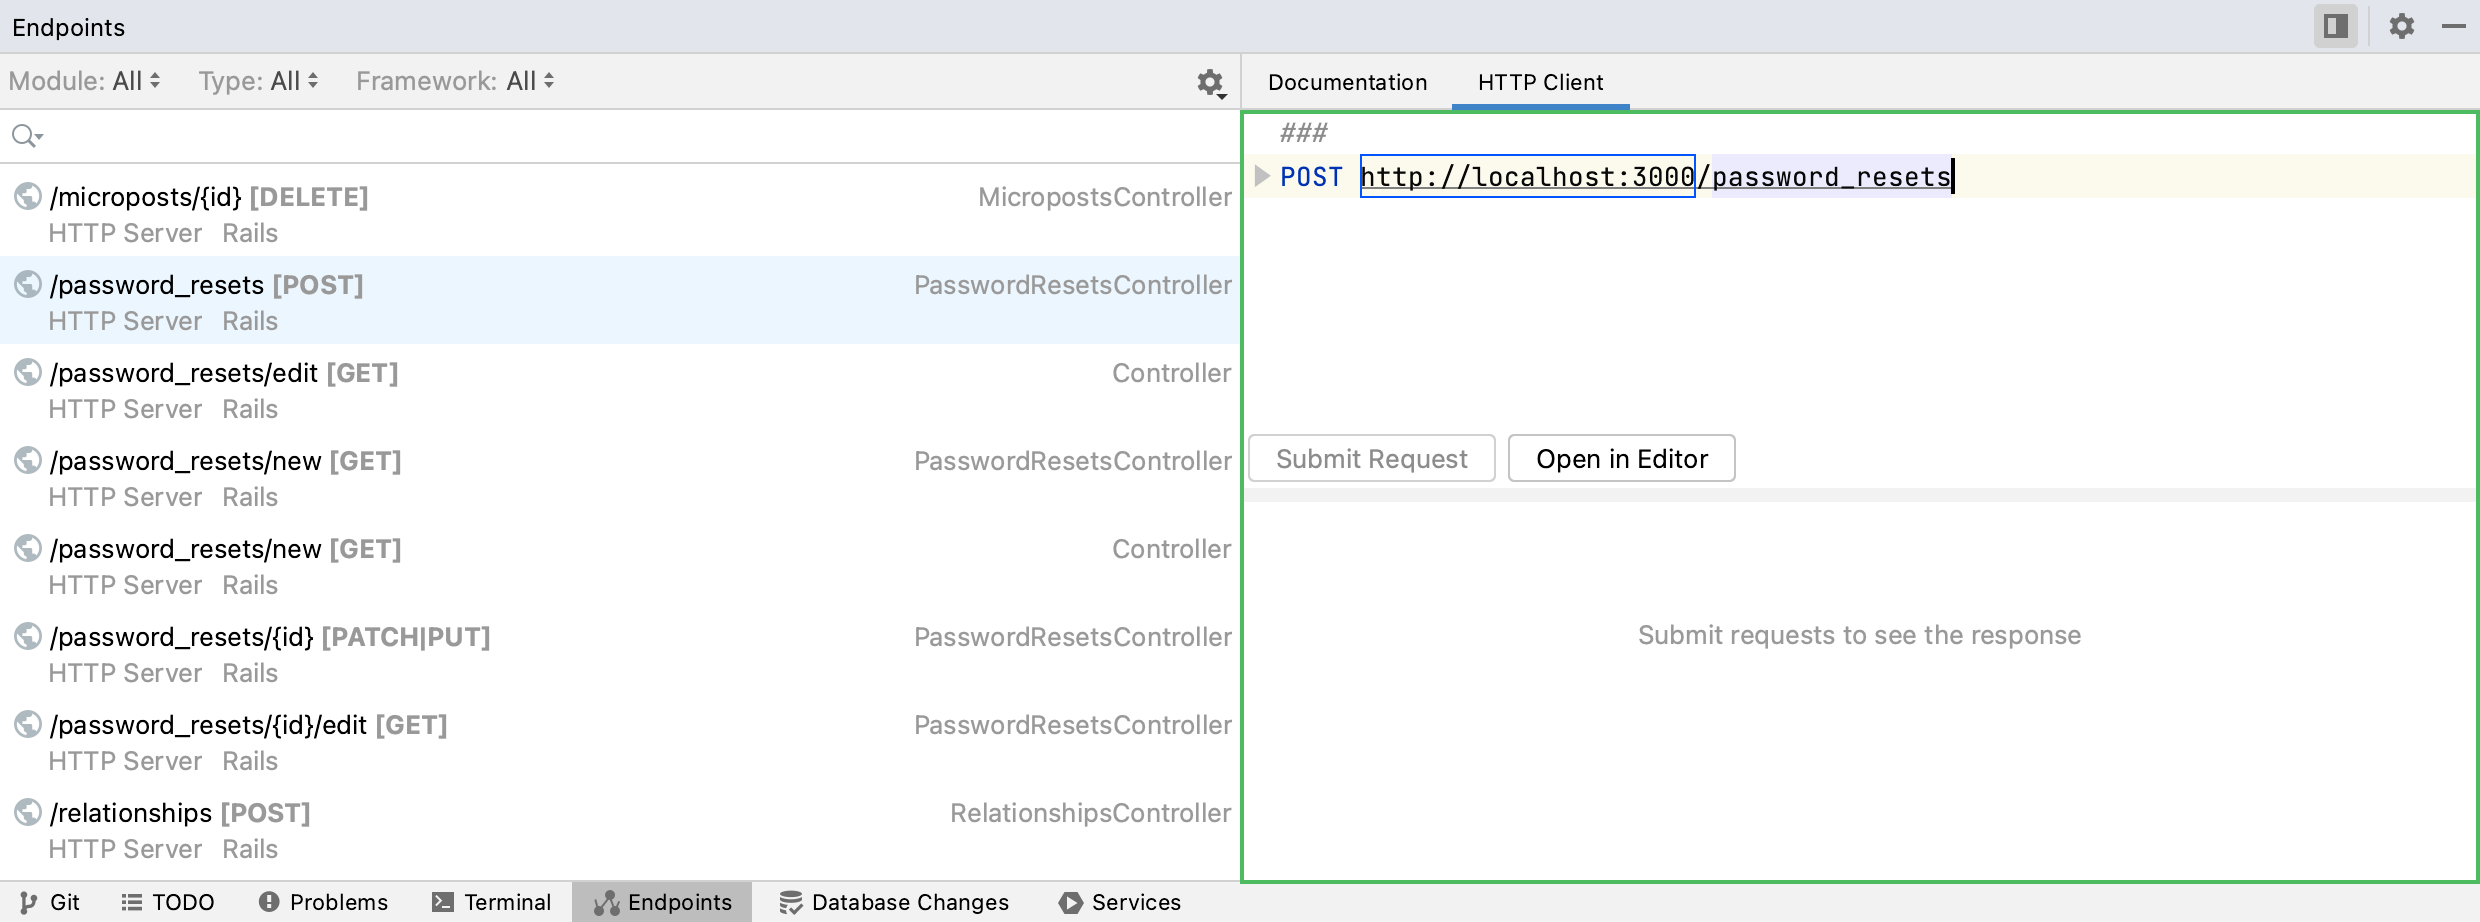 Endpoints tool window: HTTP Client tab